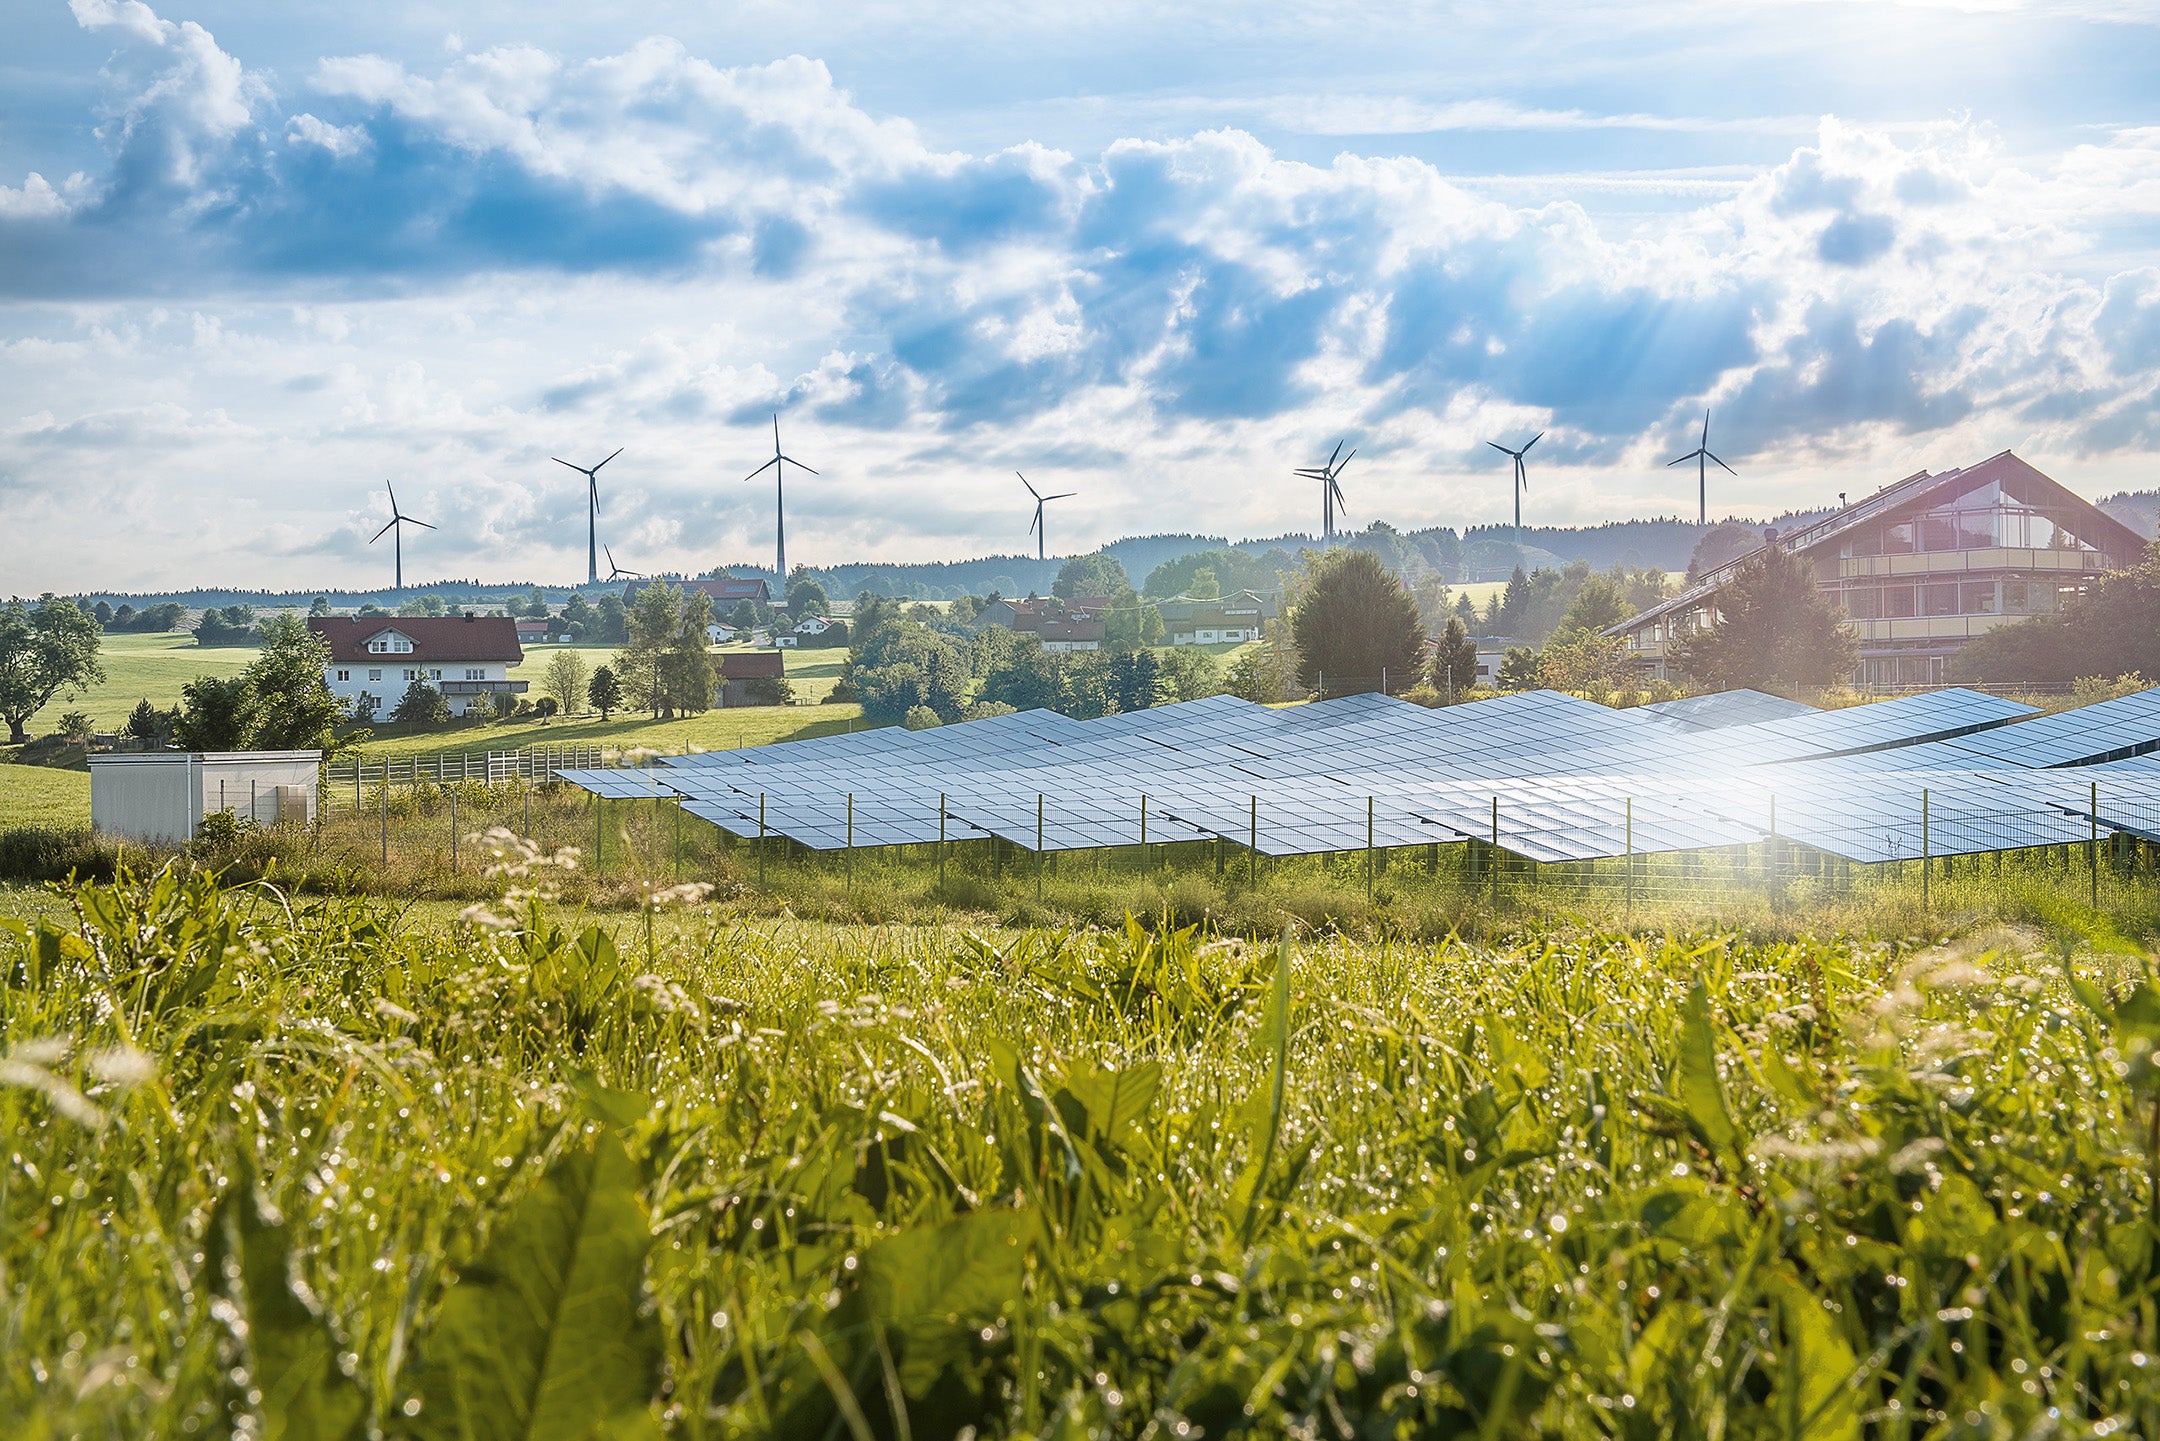 Let's get digital: Rethinking energy systems to create a smarter, greener future